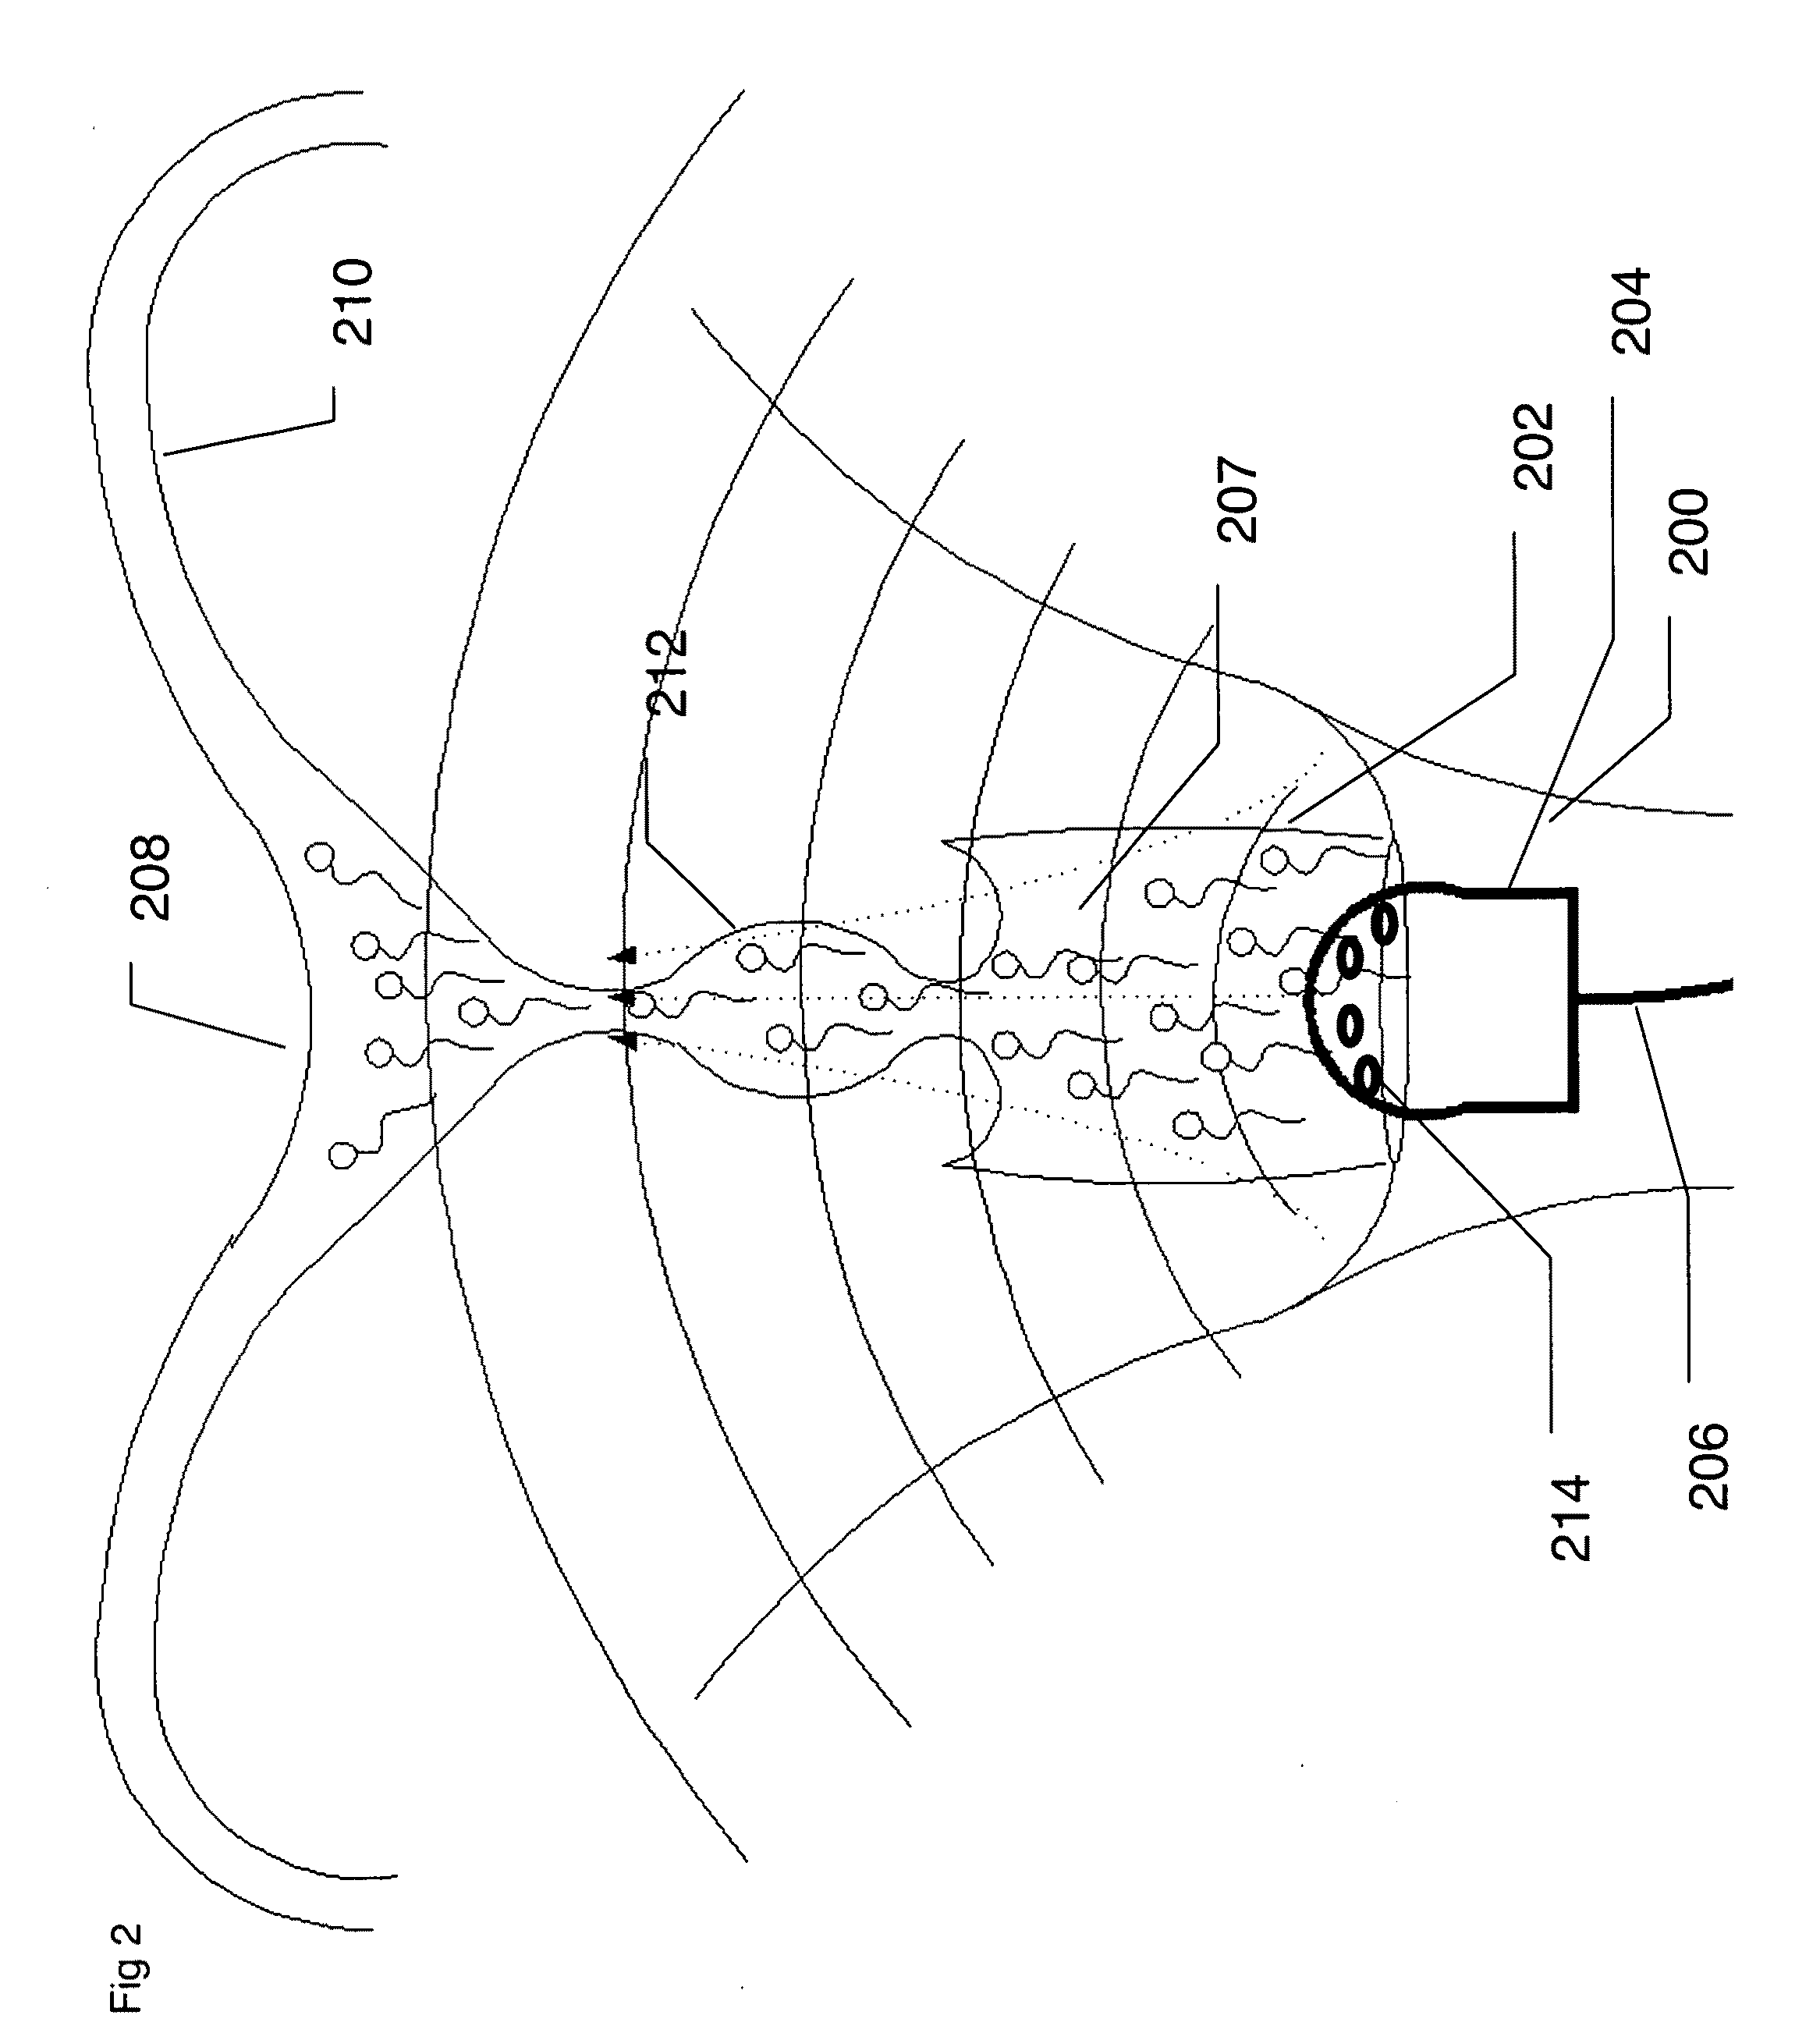 Ultrasonic device for fertility control and management and navigation